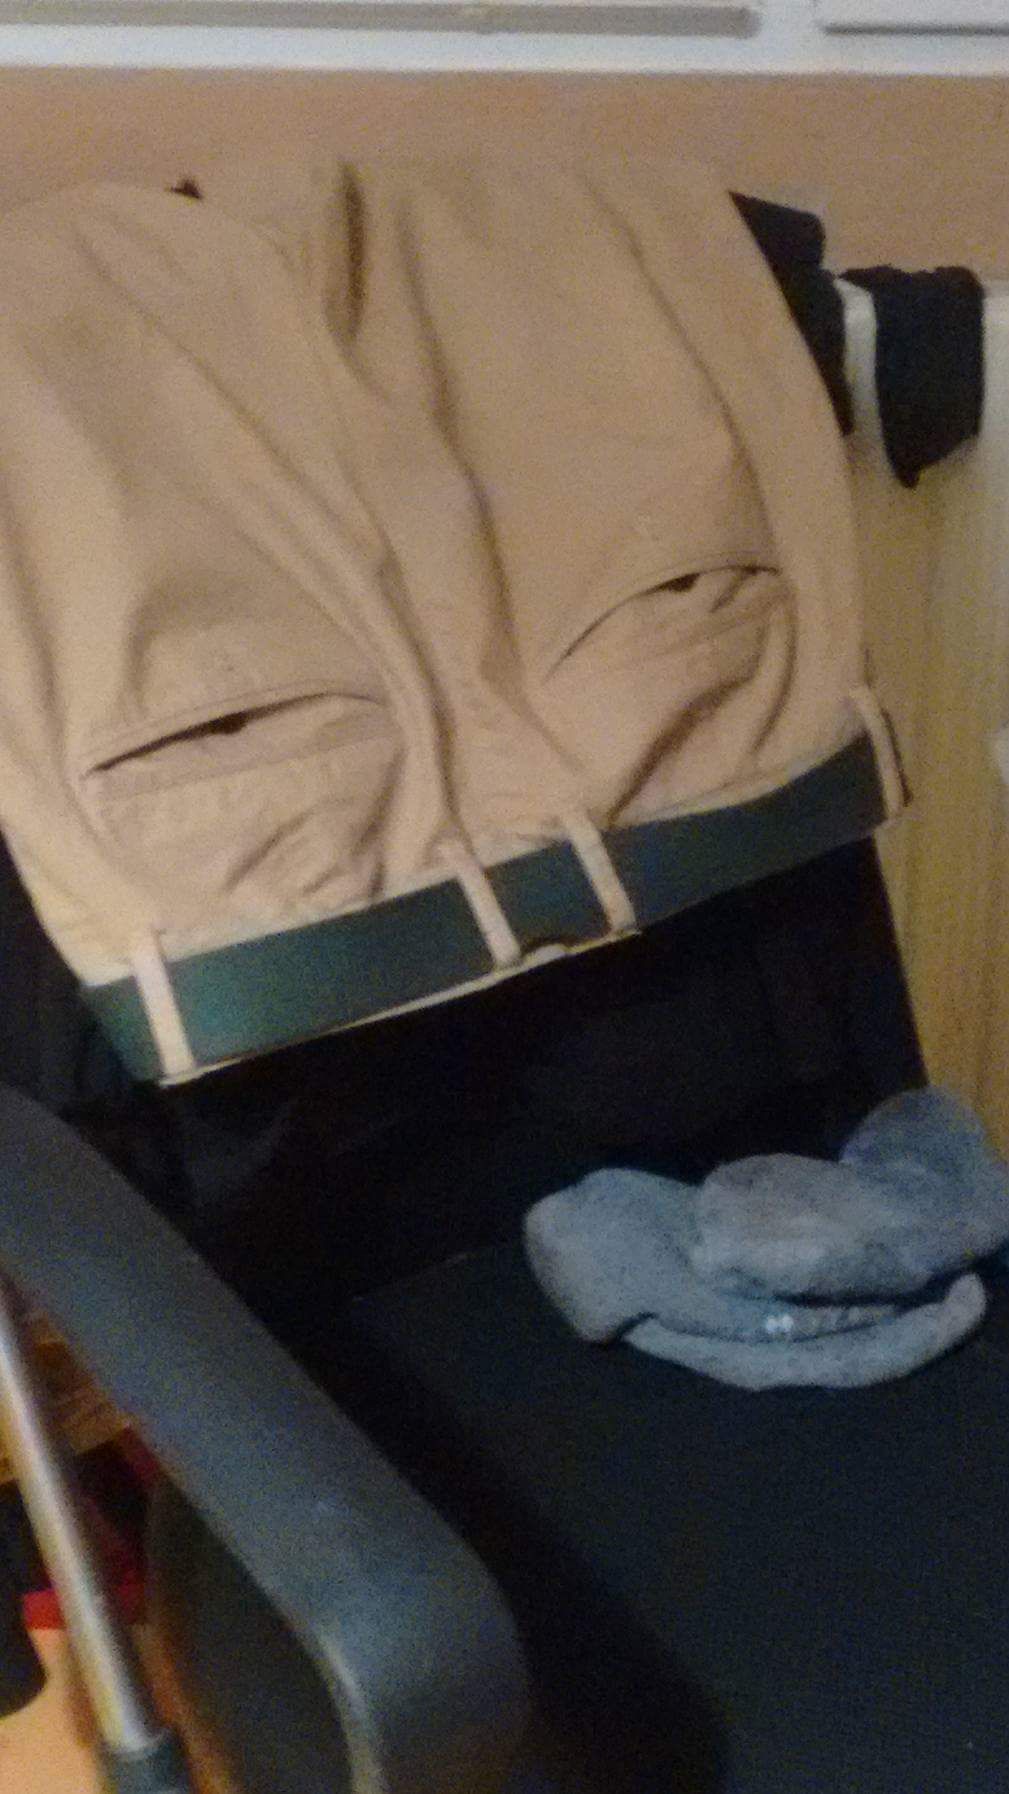 My pants looking high and smirky at me